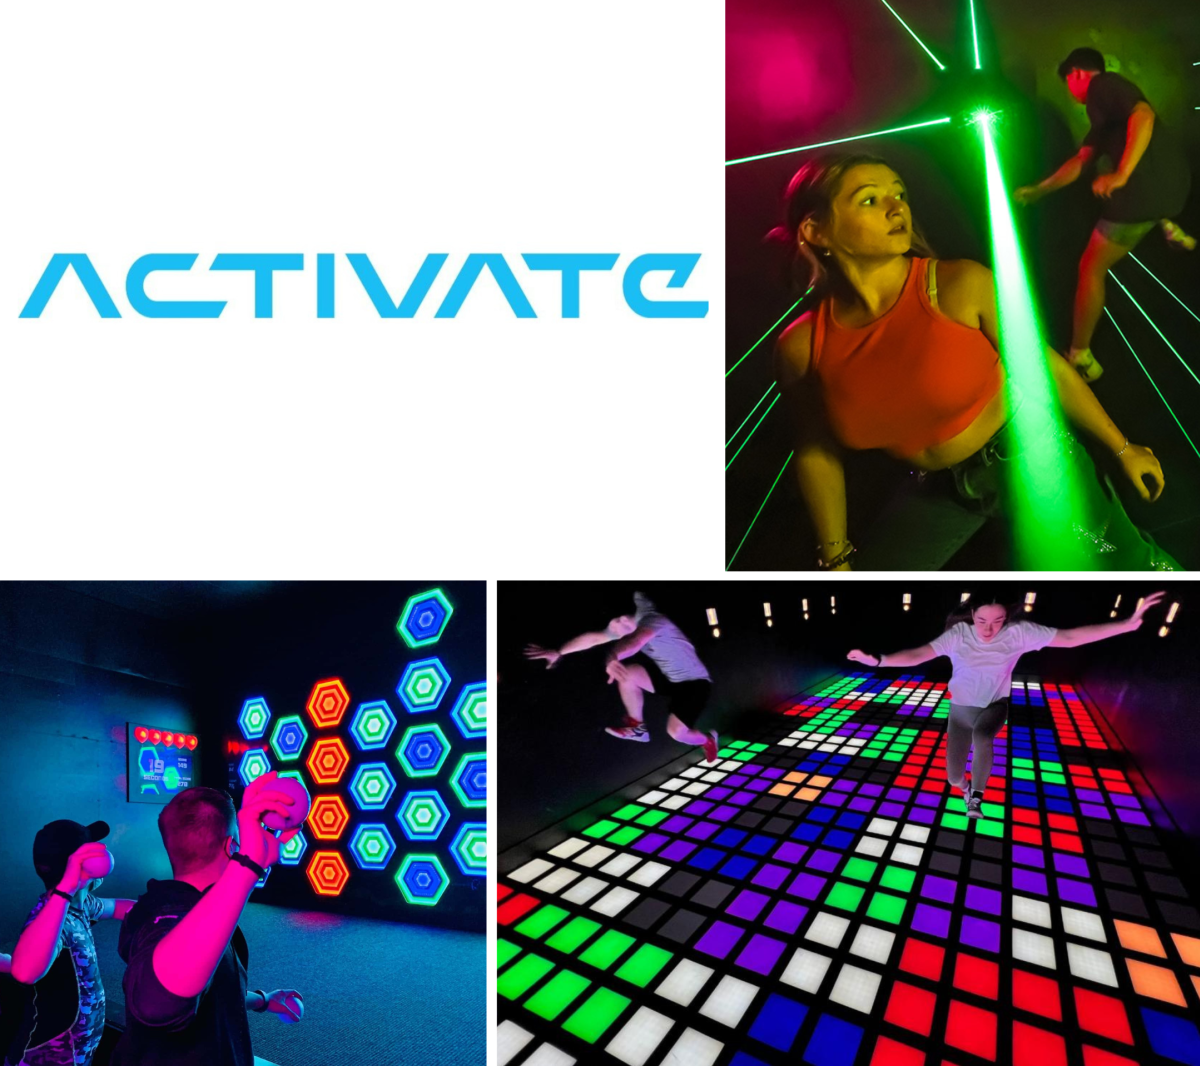 Activate Image Collage